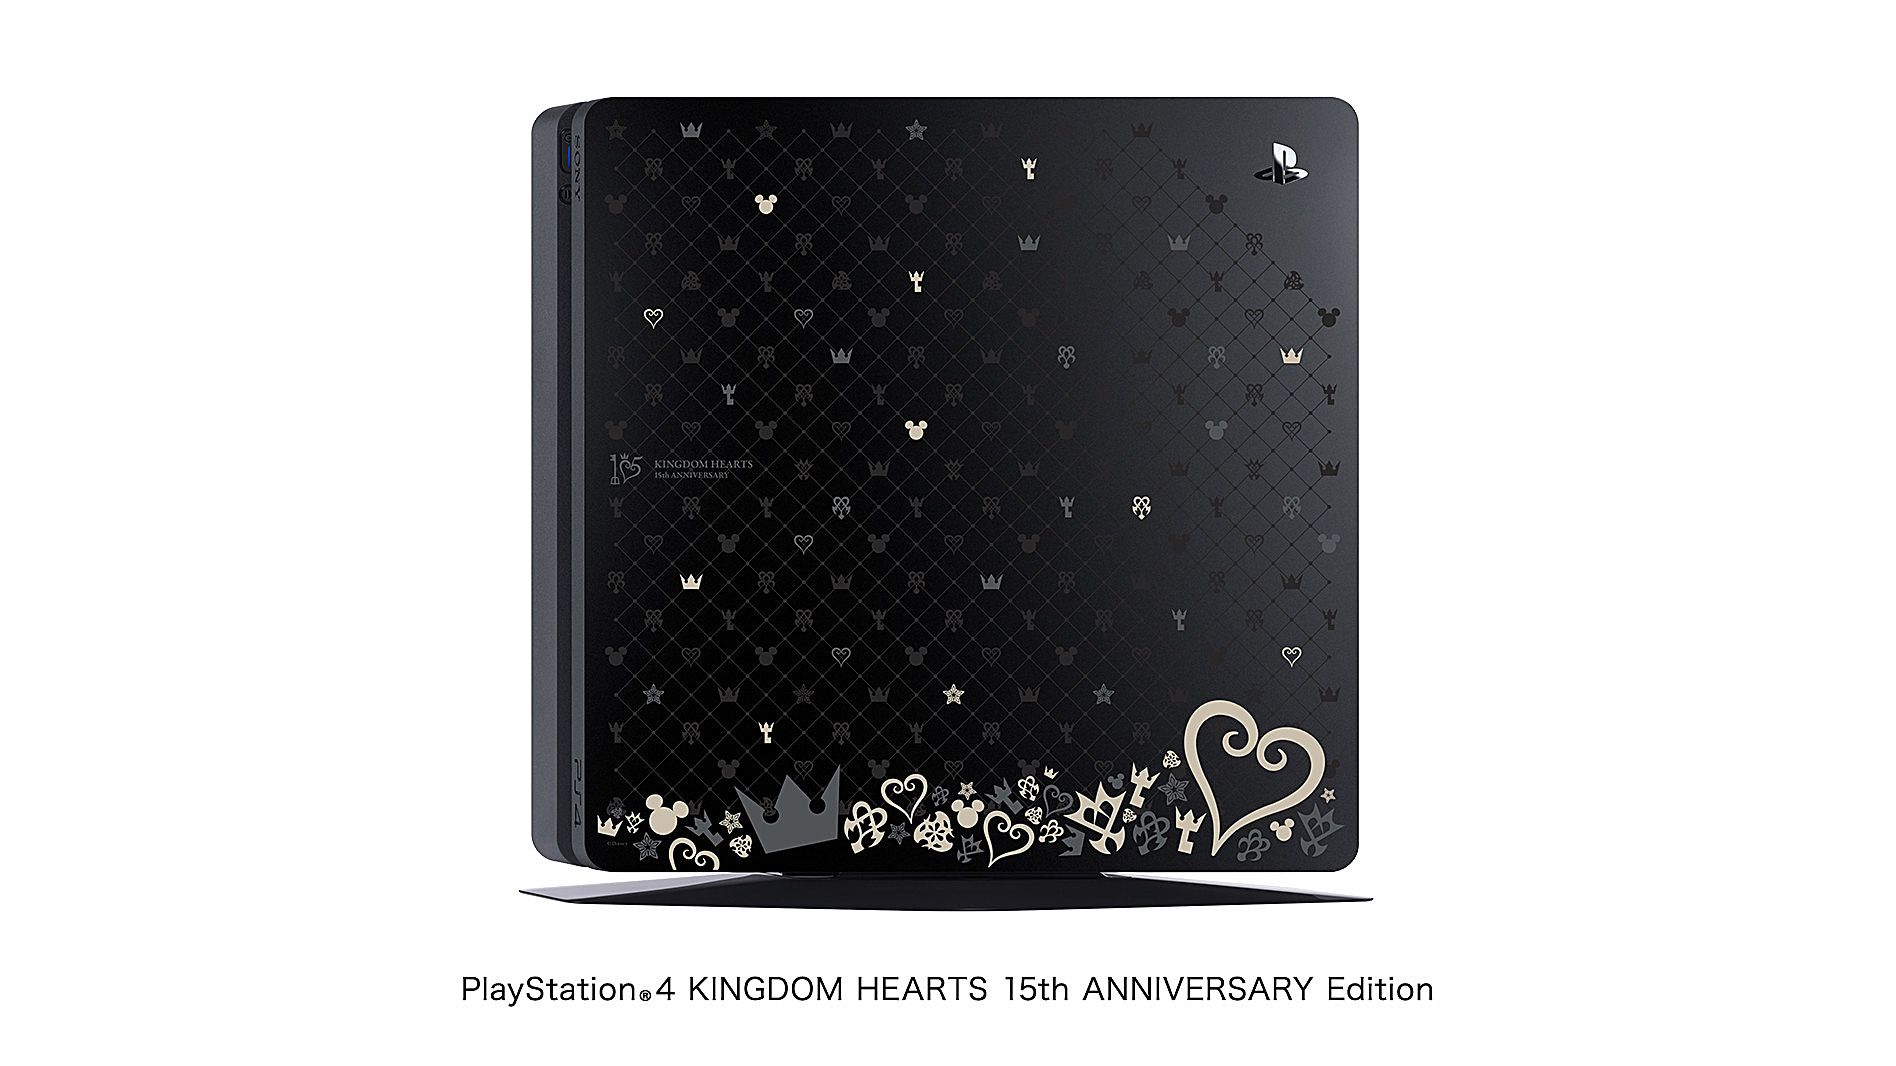 Sony Announces Limited Edition Kingdom Hearts 15th Anniversary PS4